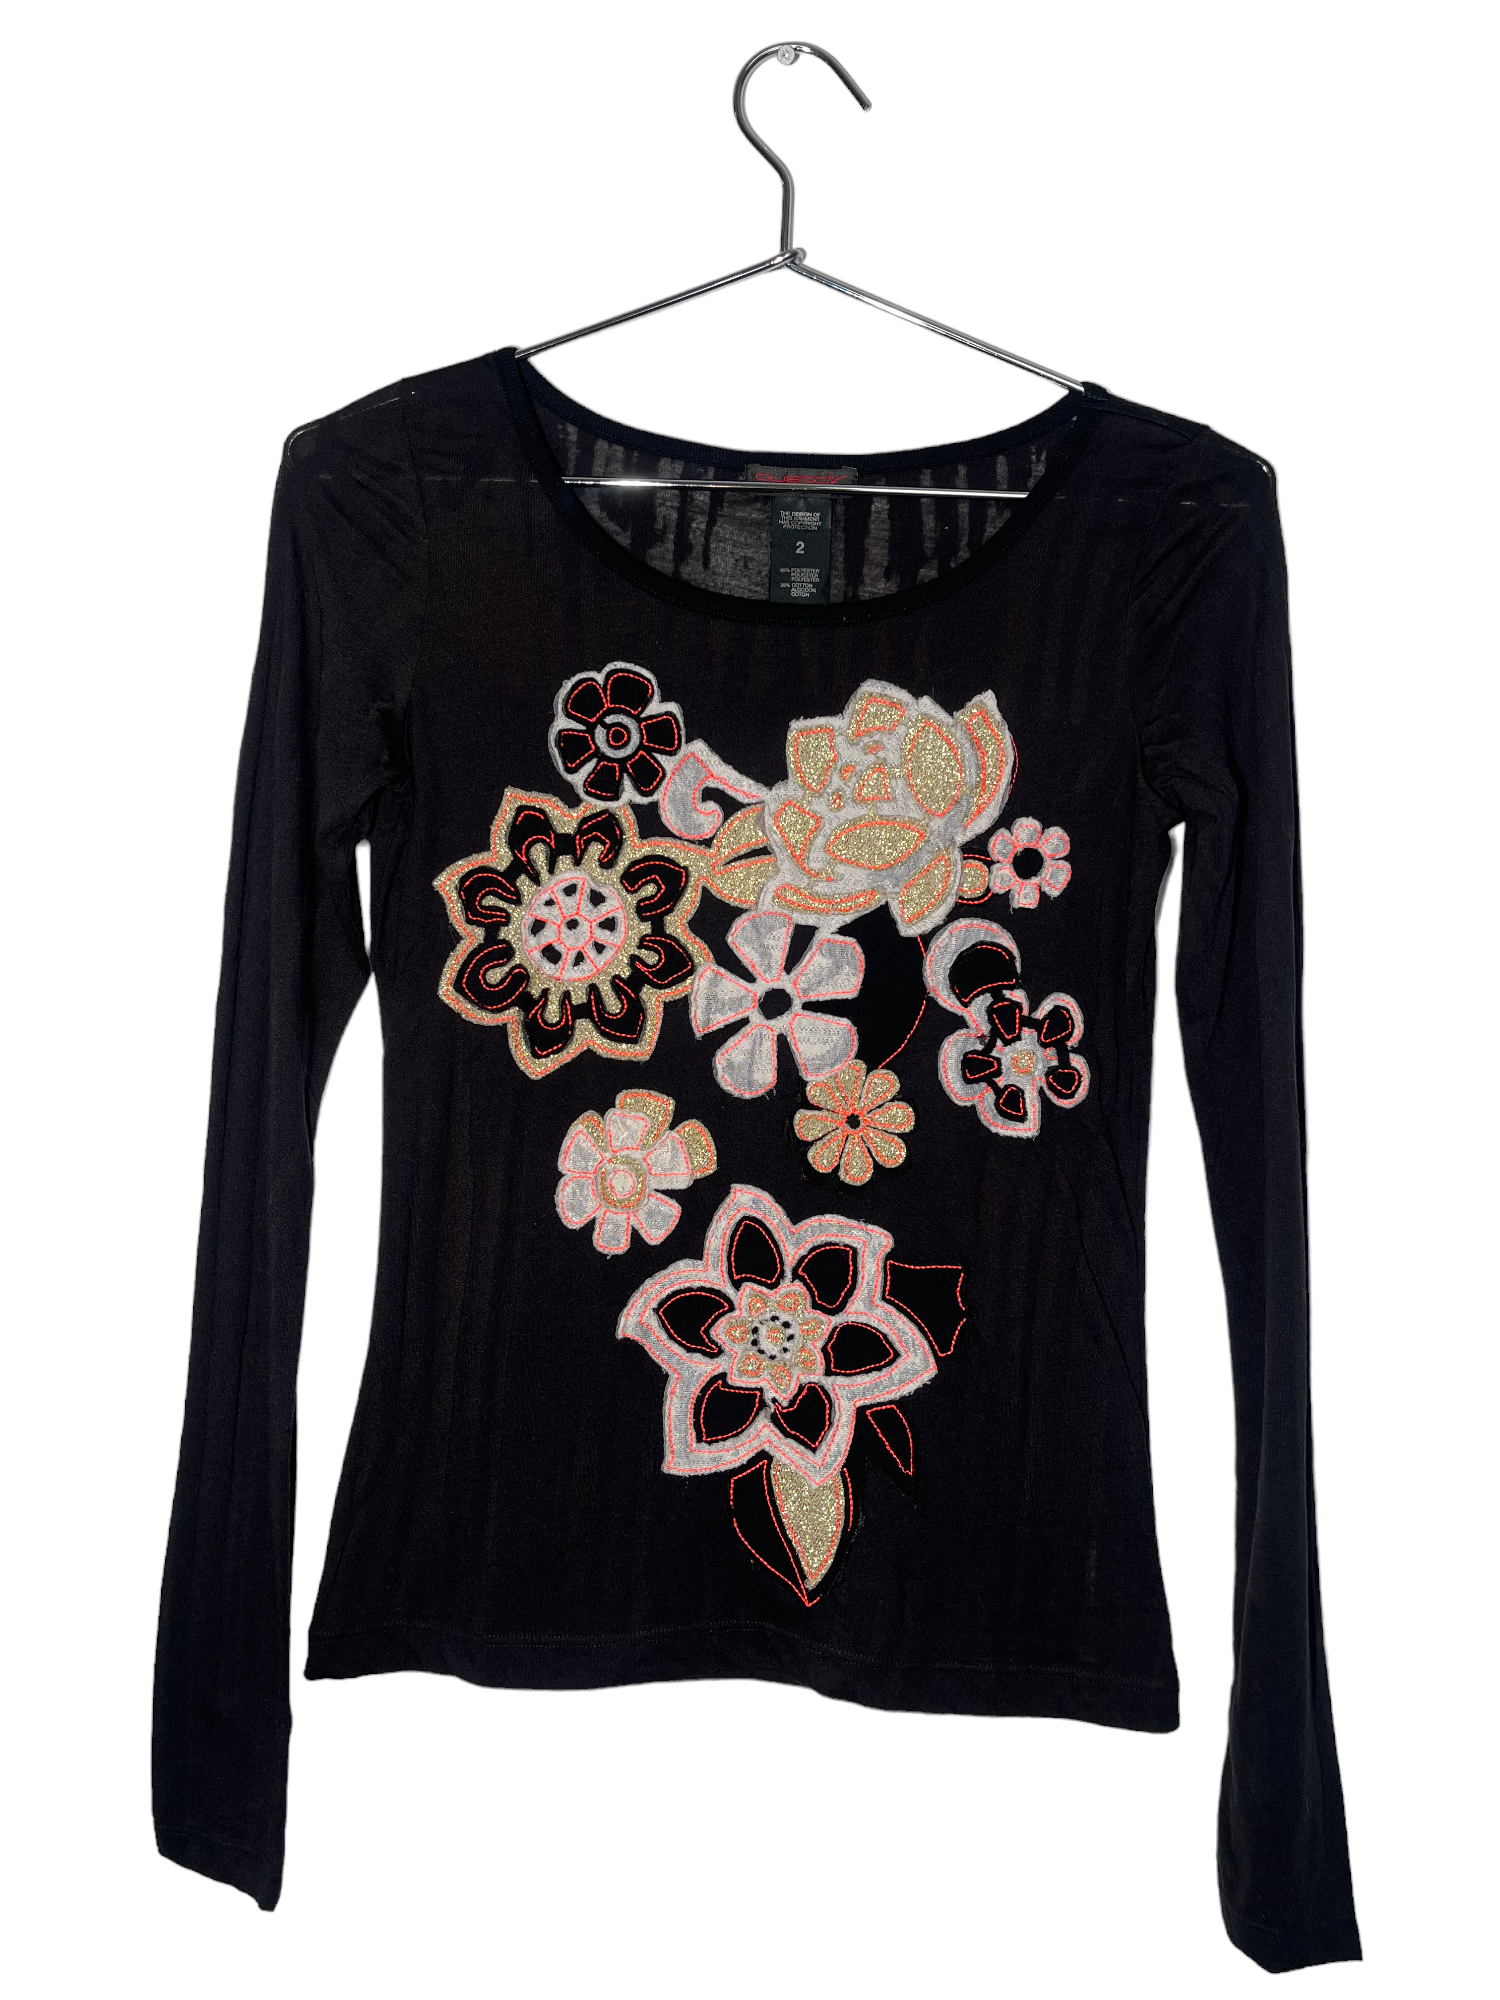 Custo Long Sleeve Top Floral Patchwork Design